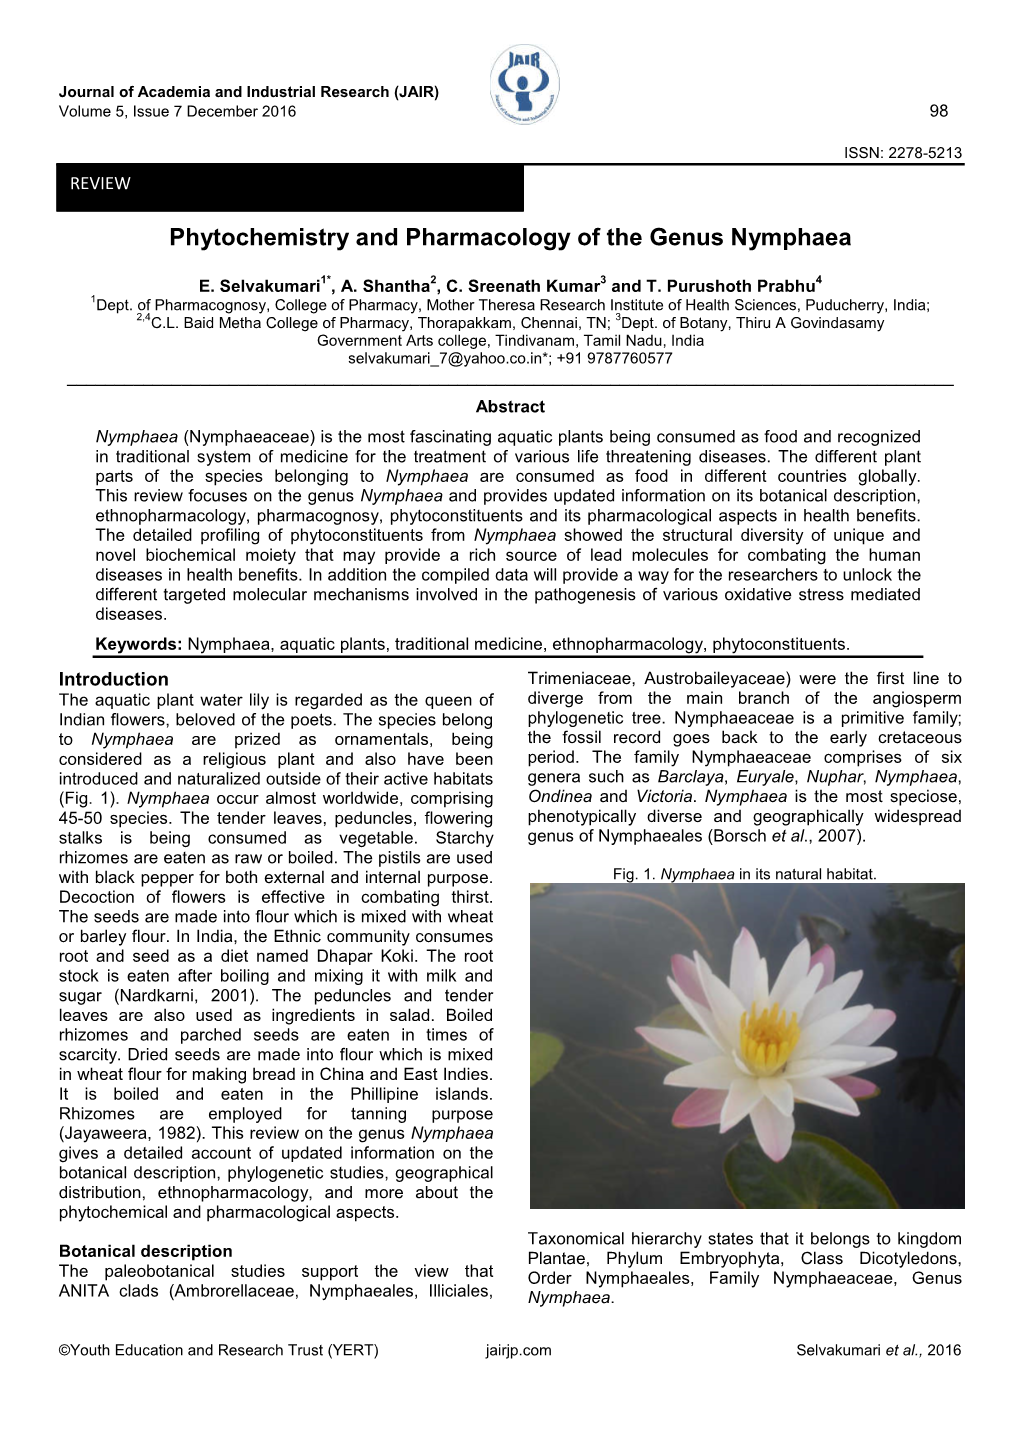 Phytochemistry and Pharmacology of the Genus Nymphaea